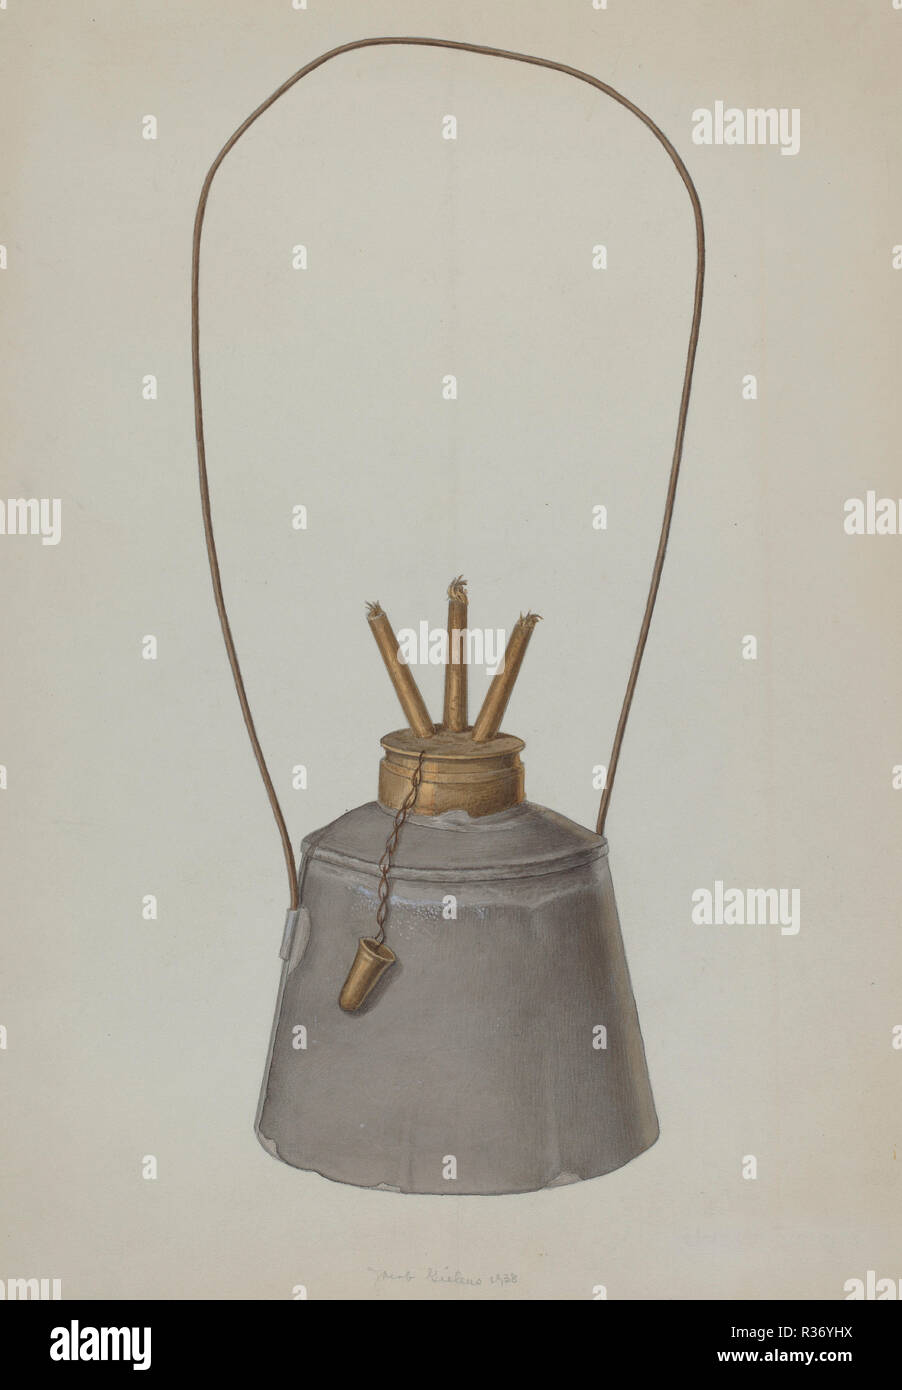 Camphene Lamp. Dated: 1938. Dimensions: overall: 35.6 x 24.4 cm (14 x 9 5/8 in.)  Original IAD Object: 12' high; 4 1/2' wide. Medium: watercolor and graphite on paper. Museum: National Gallery of Art, Washington DC. Author: Jacob Gielens. Stock Photo